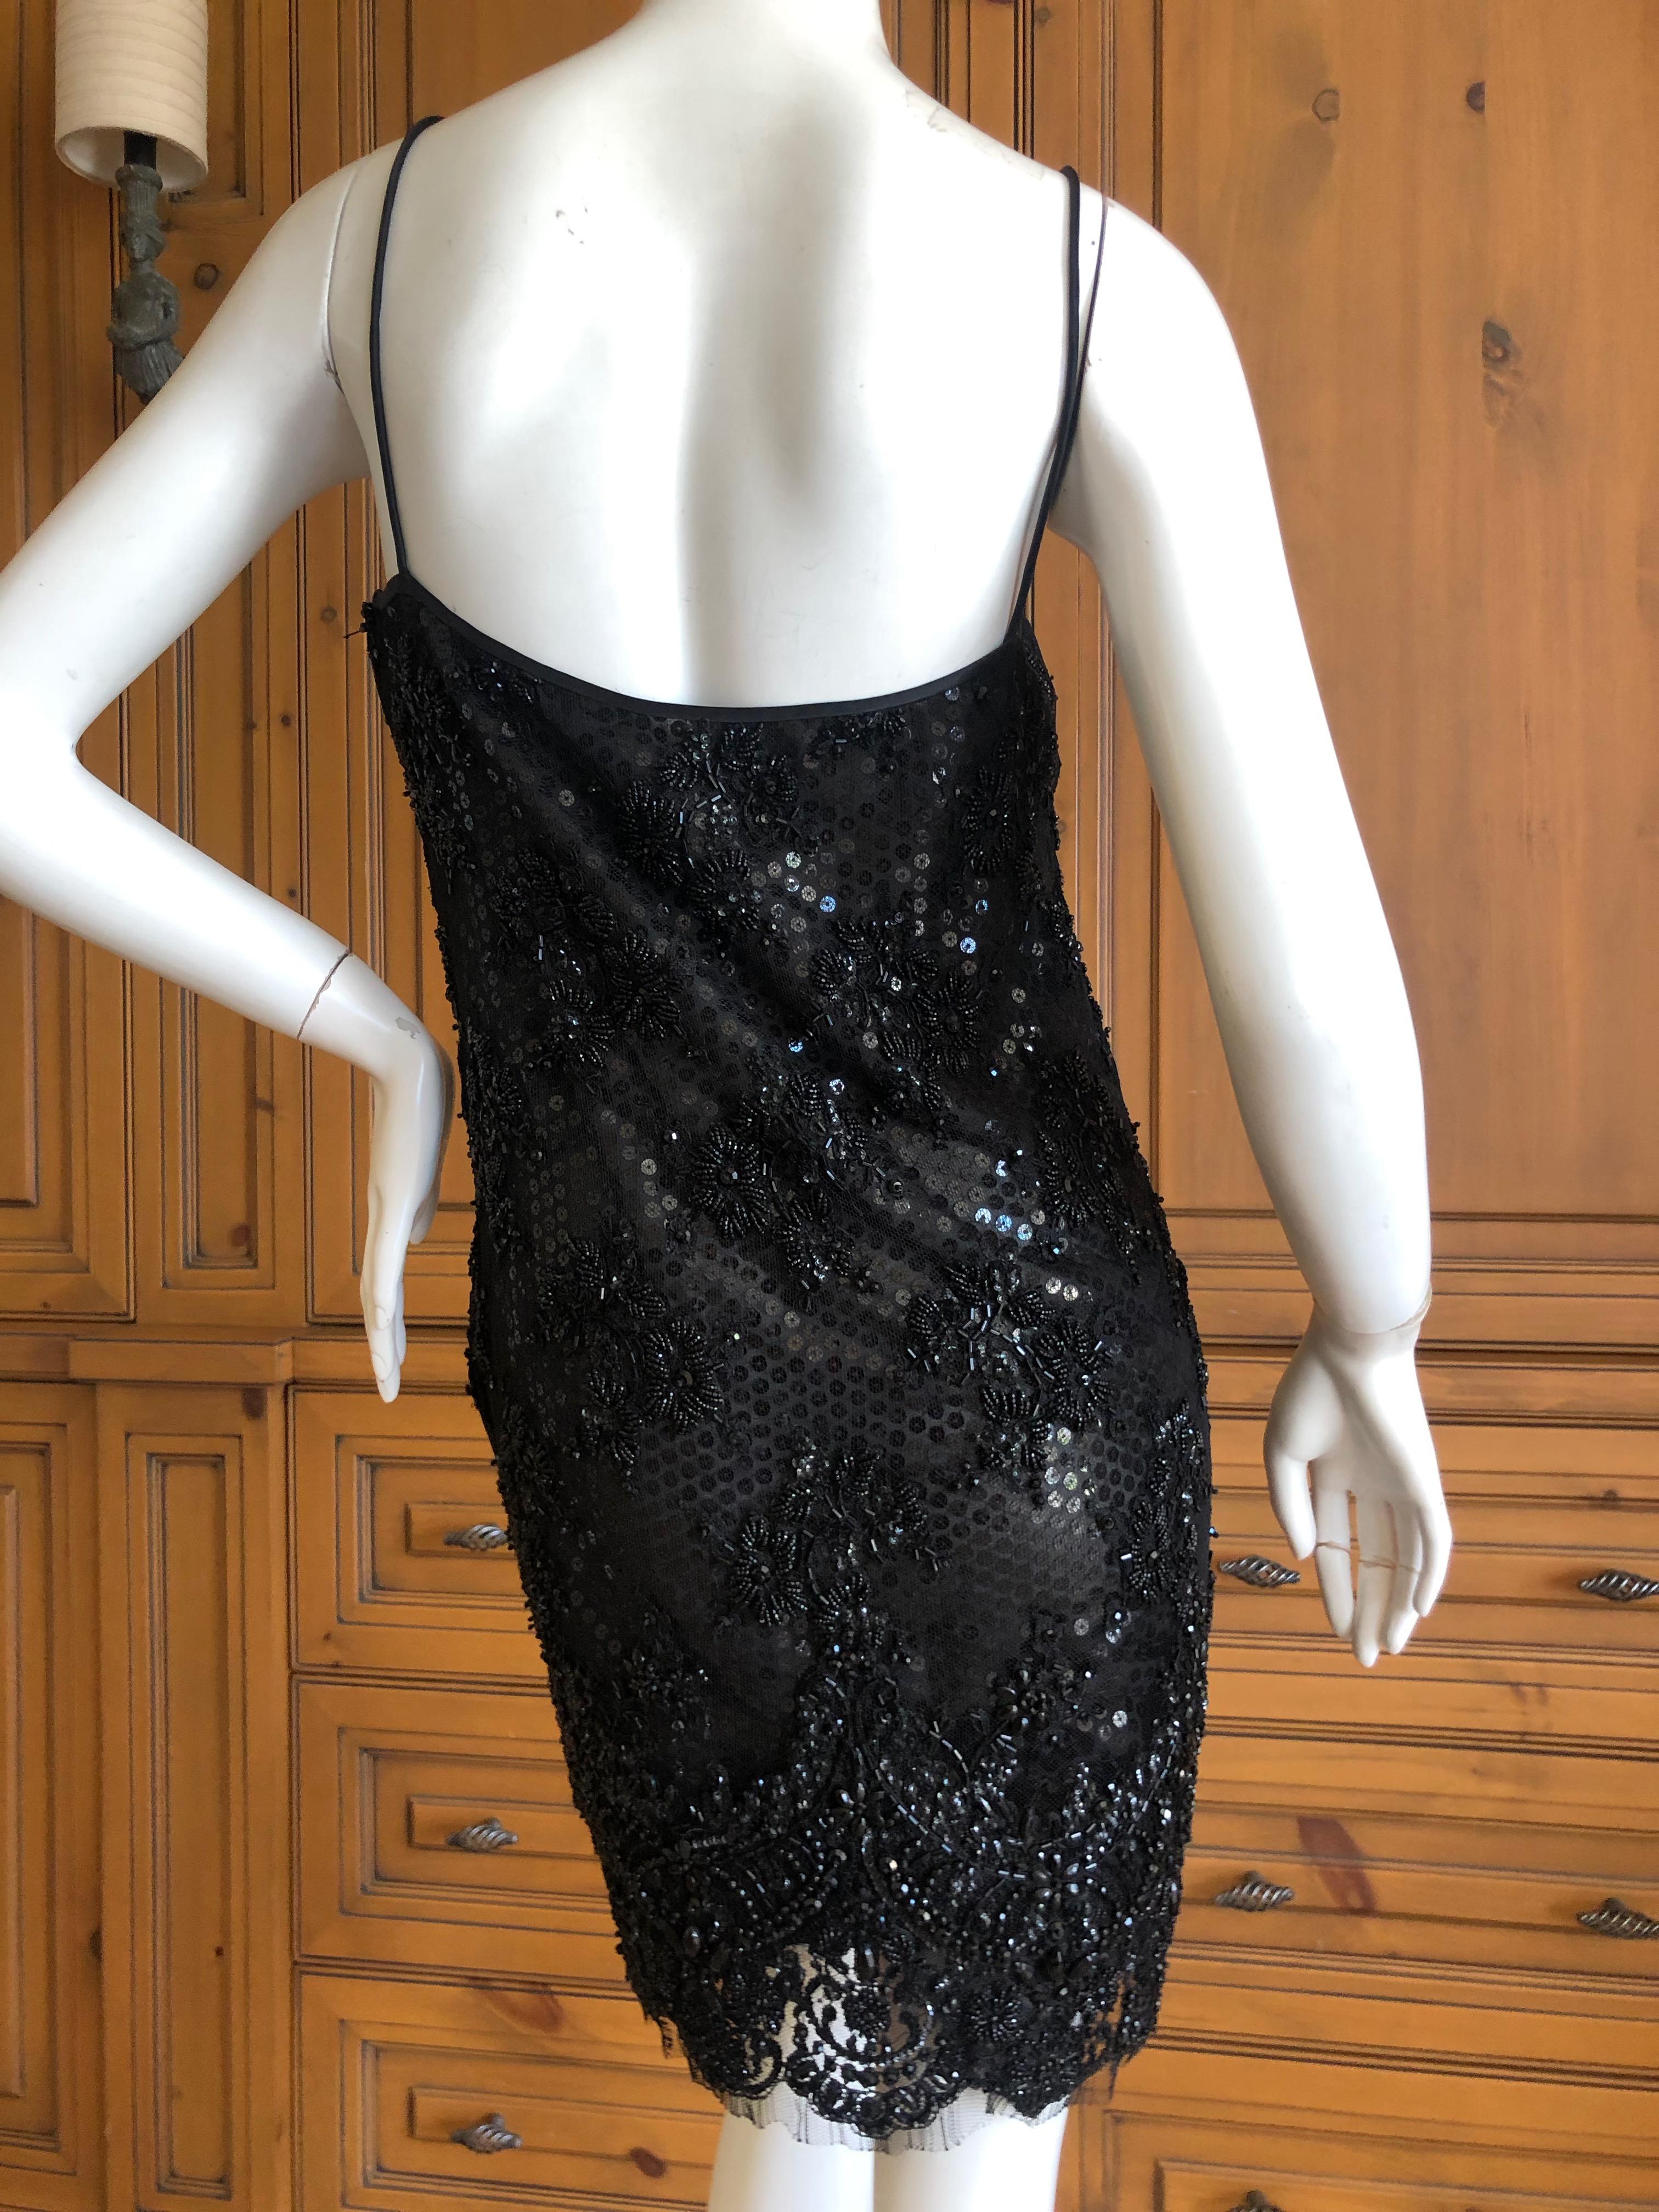  Galanos Superb Sequin and Hand Beaded Lace Little Black Mini Dress 2